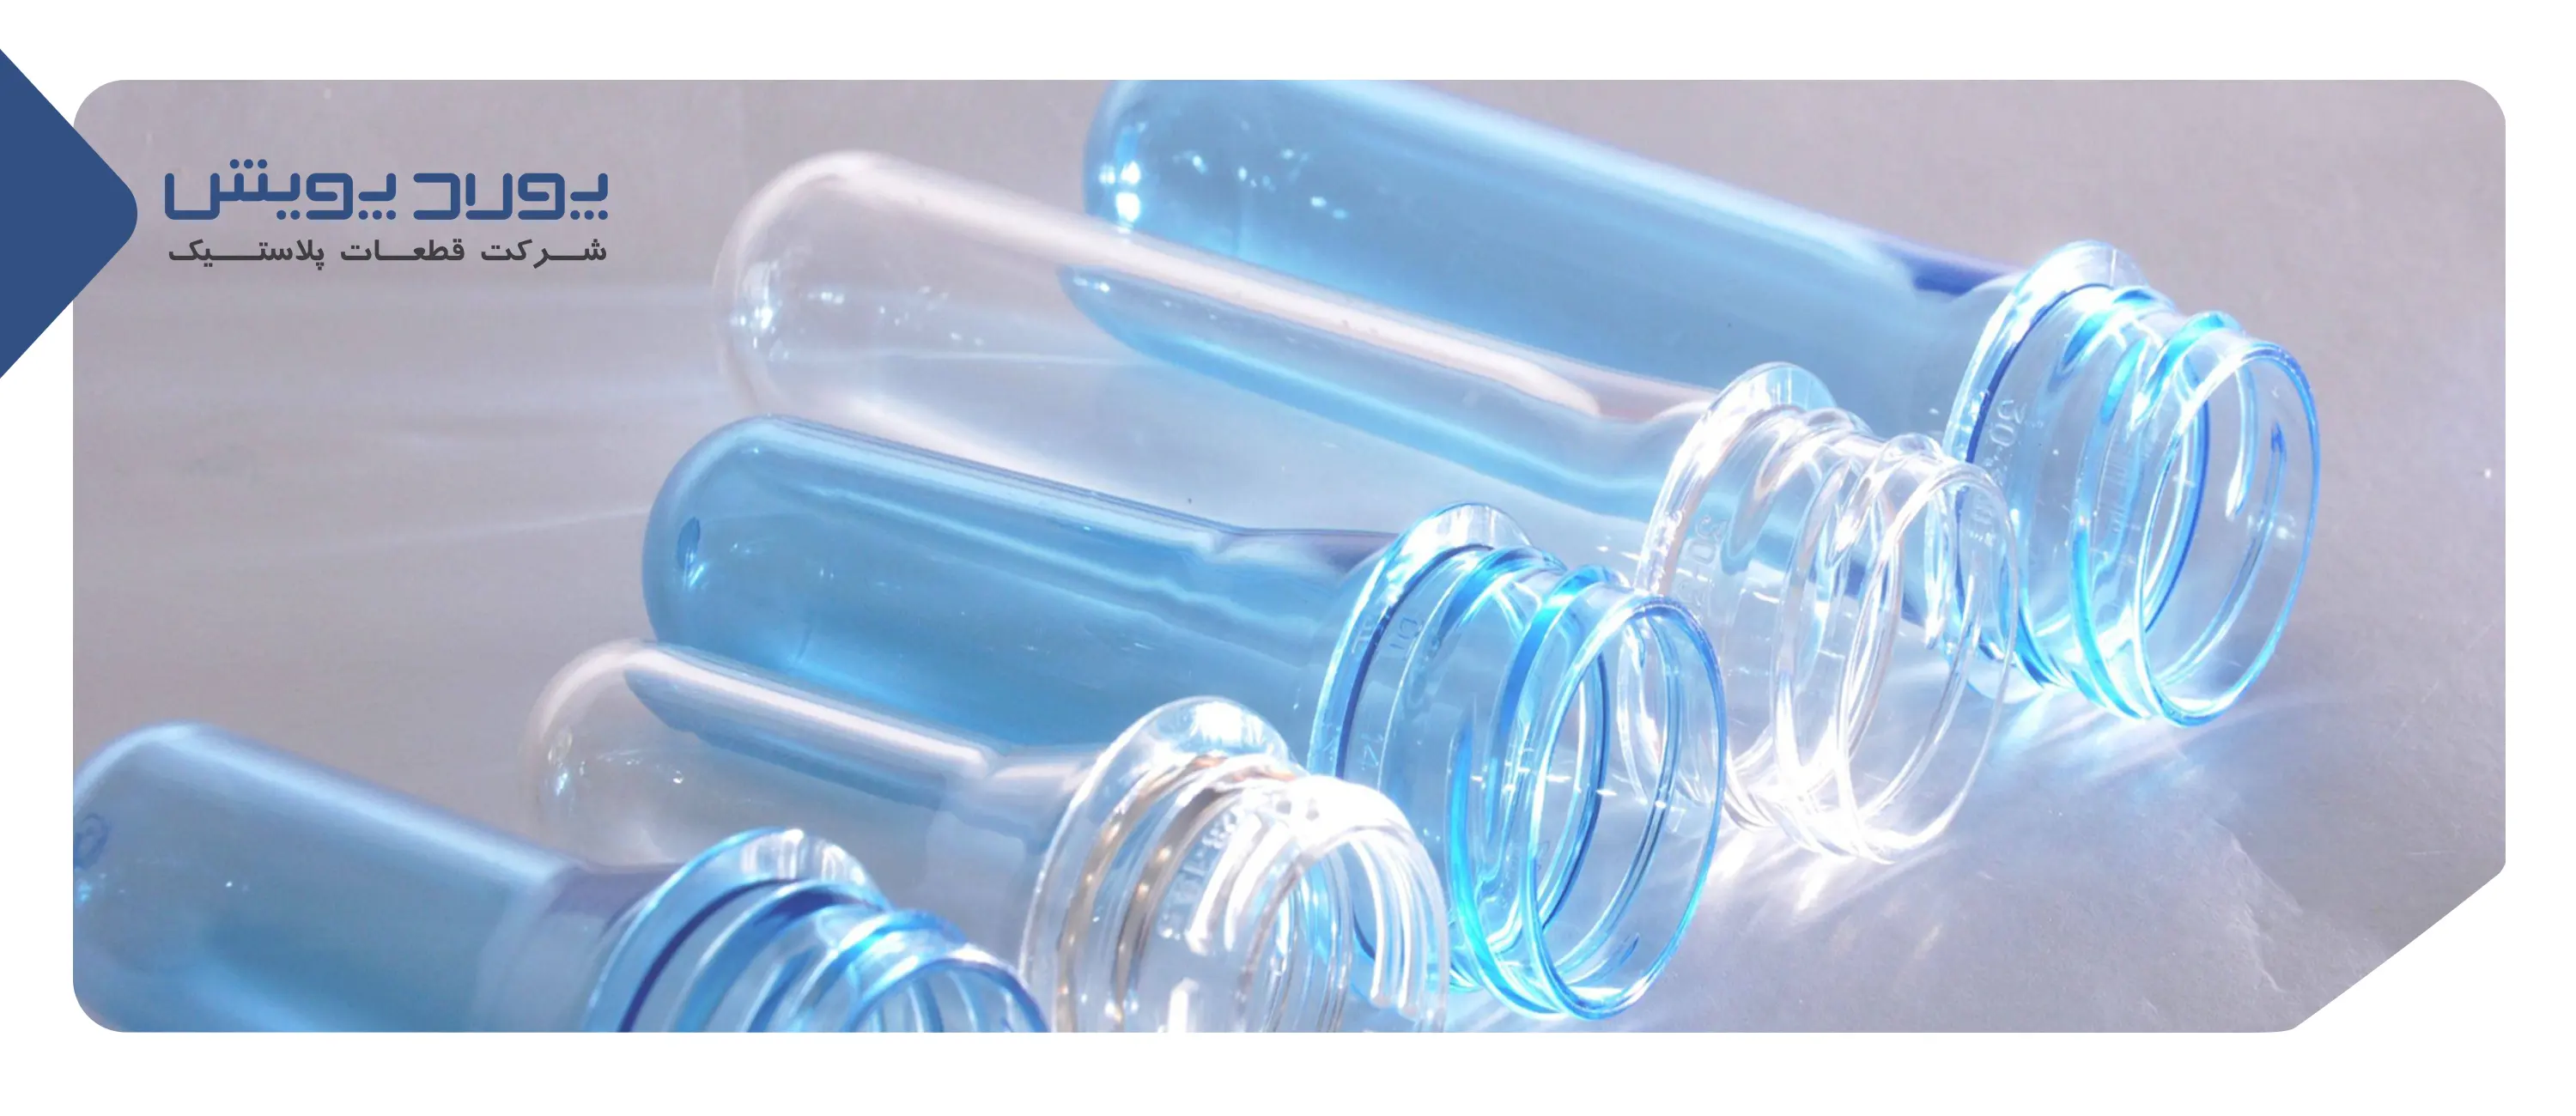 What is preform? How is a PET bottle produced?